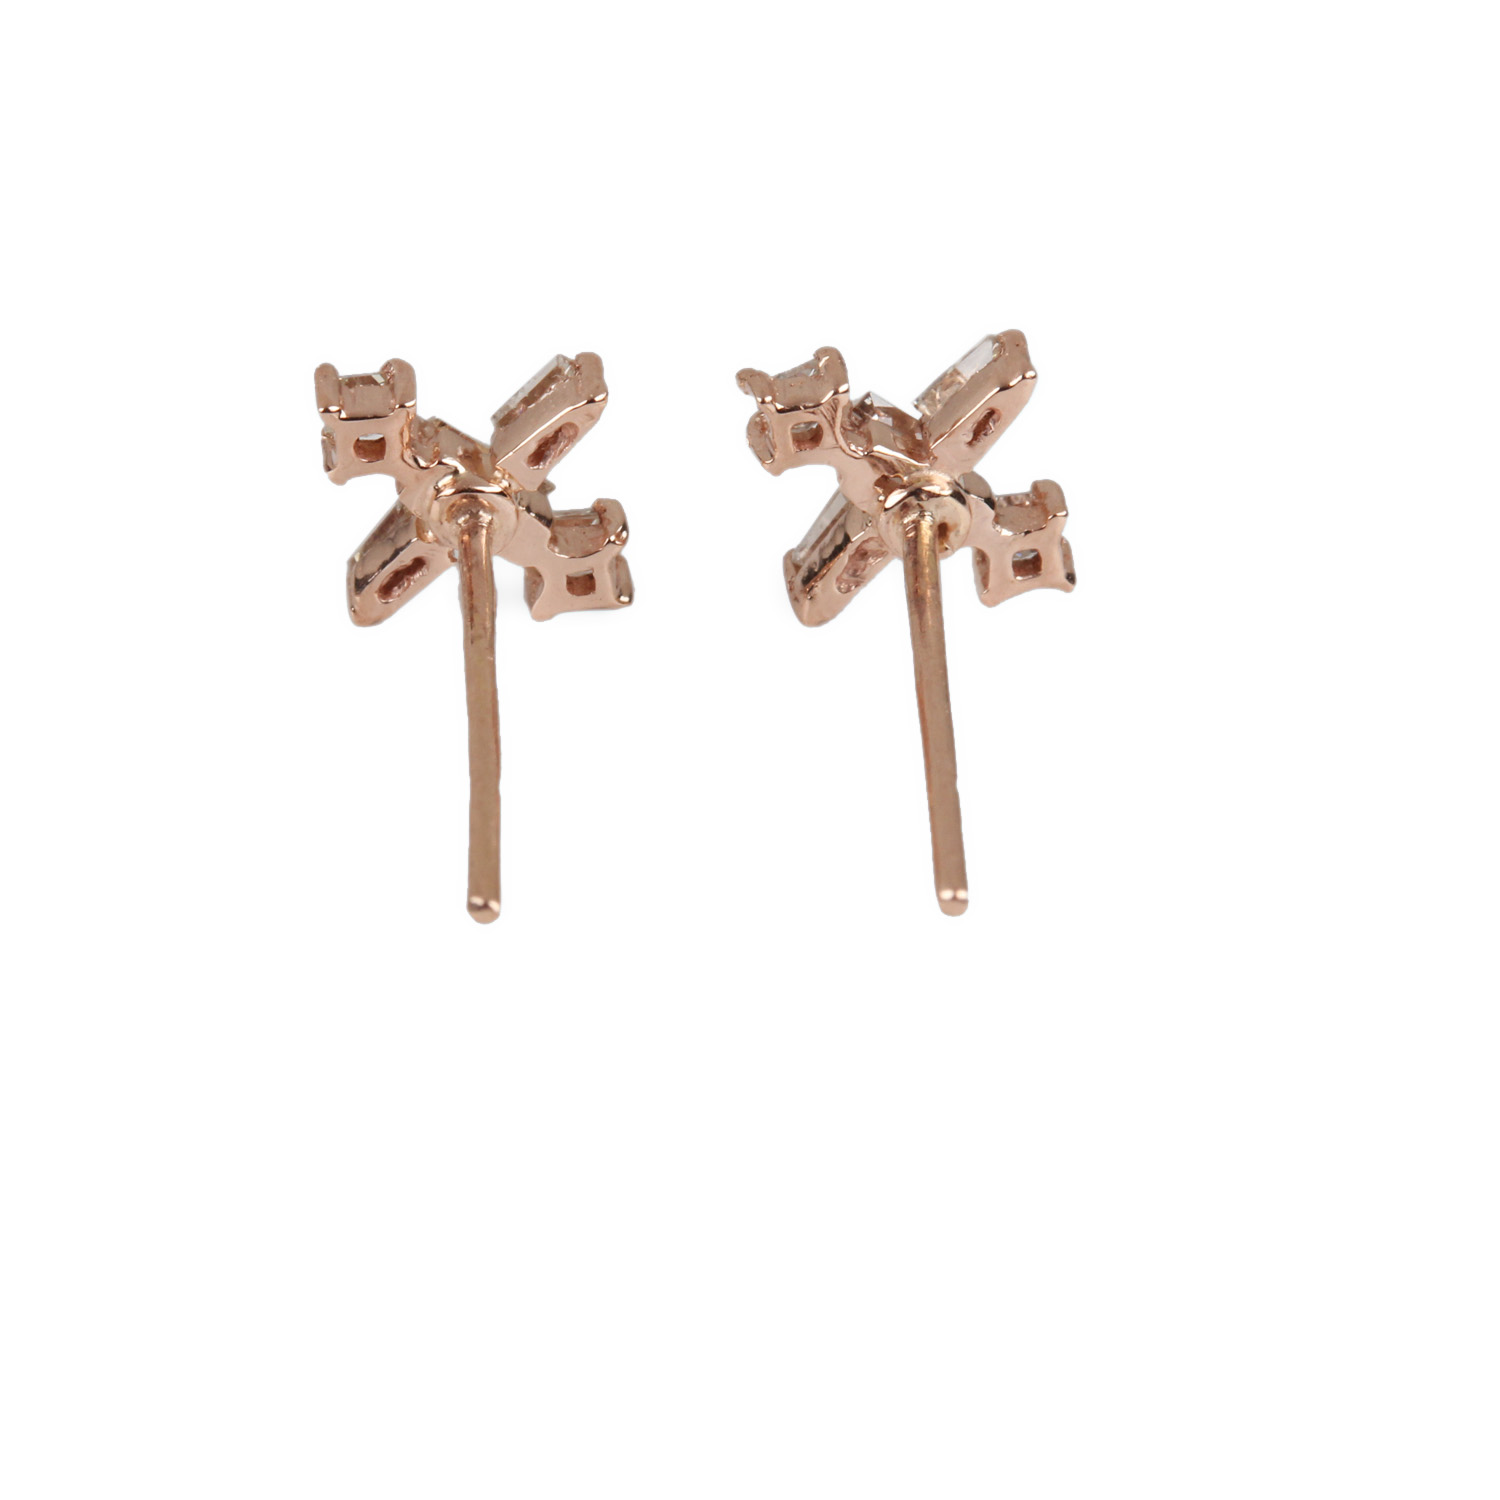 14k Solid Gold Stud Earrings Natural Diamond Jewelry